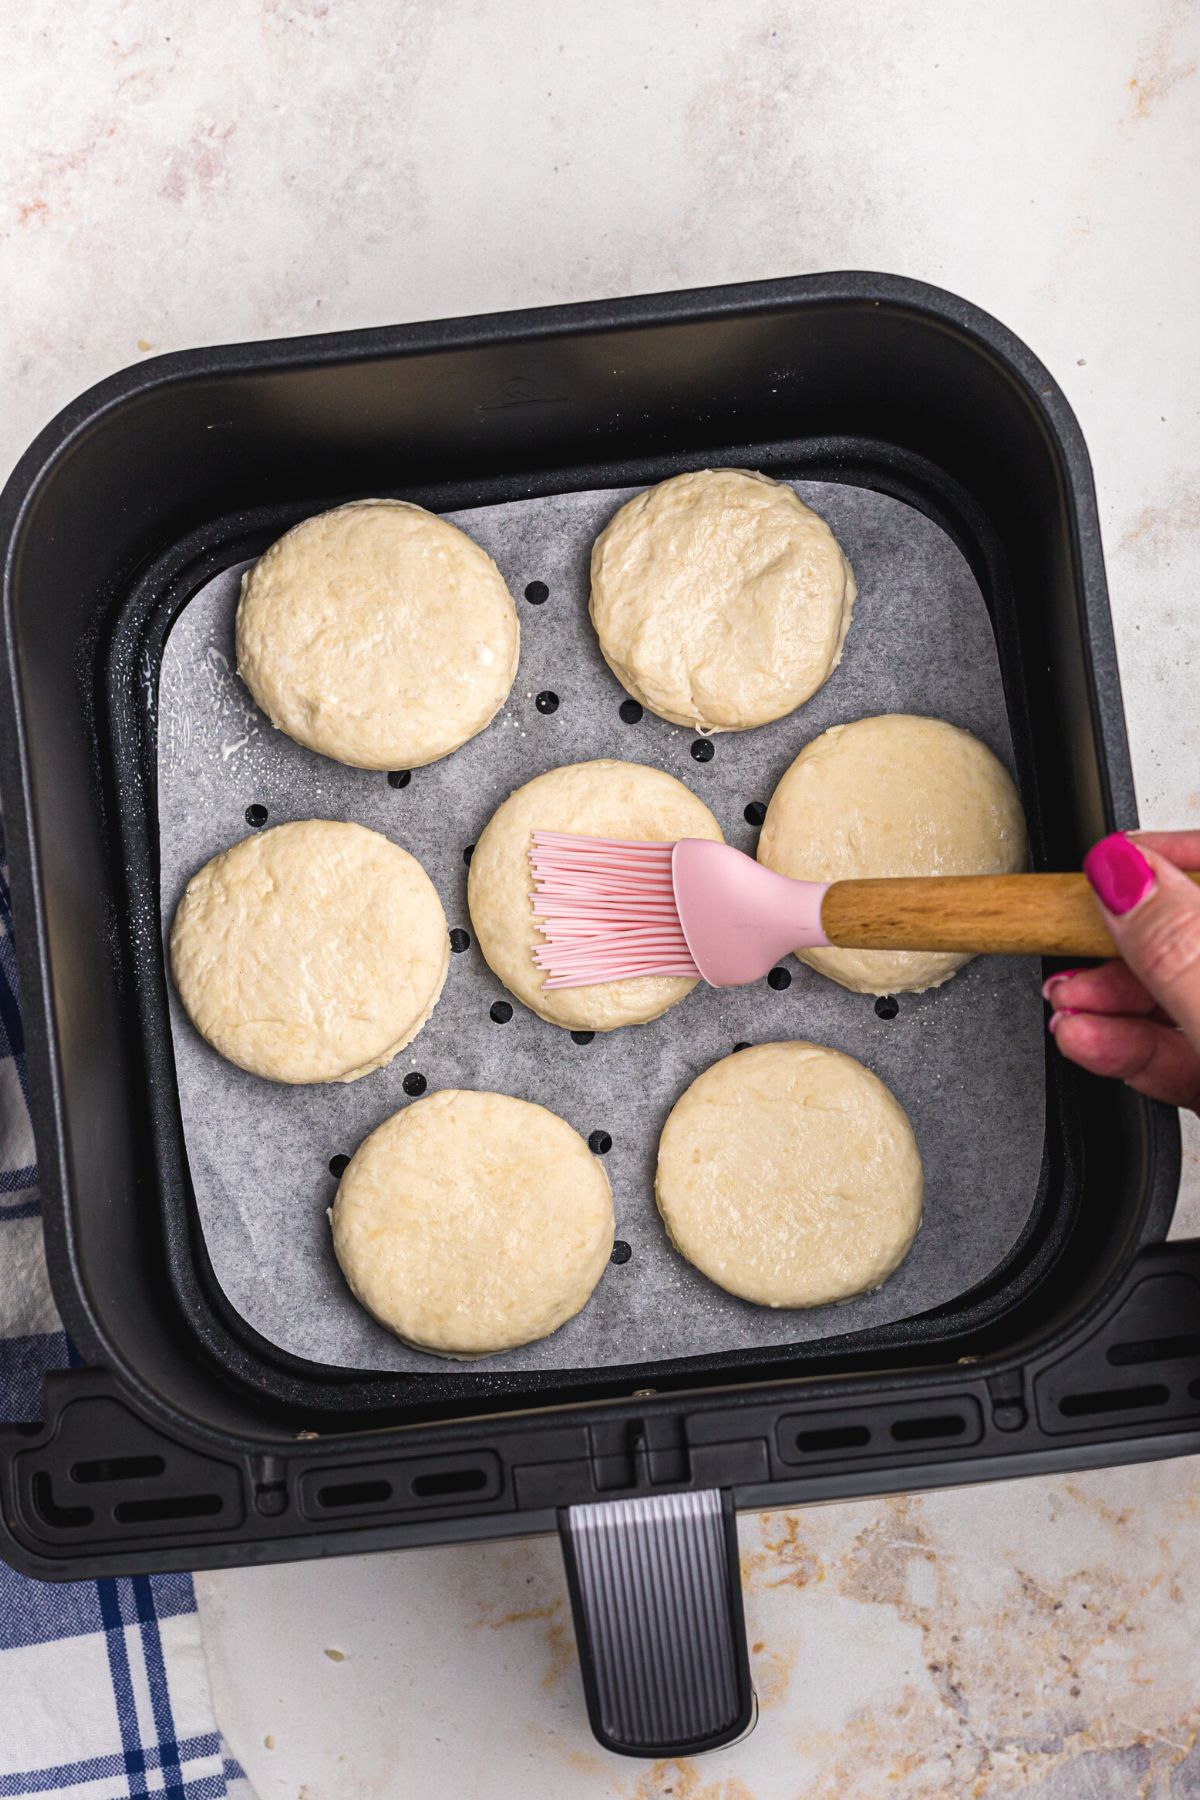 Uncooked biscuits in the air fryer basket being brushed with a milk wash.